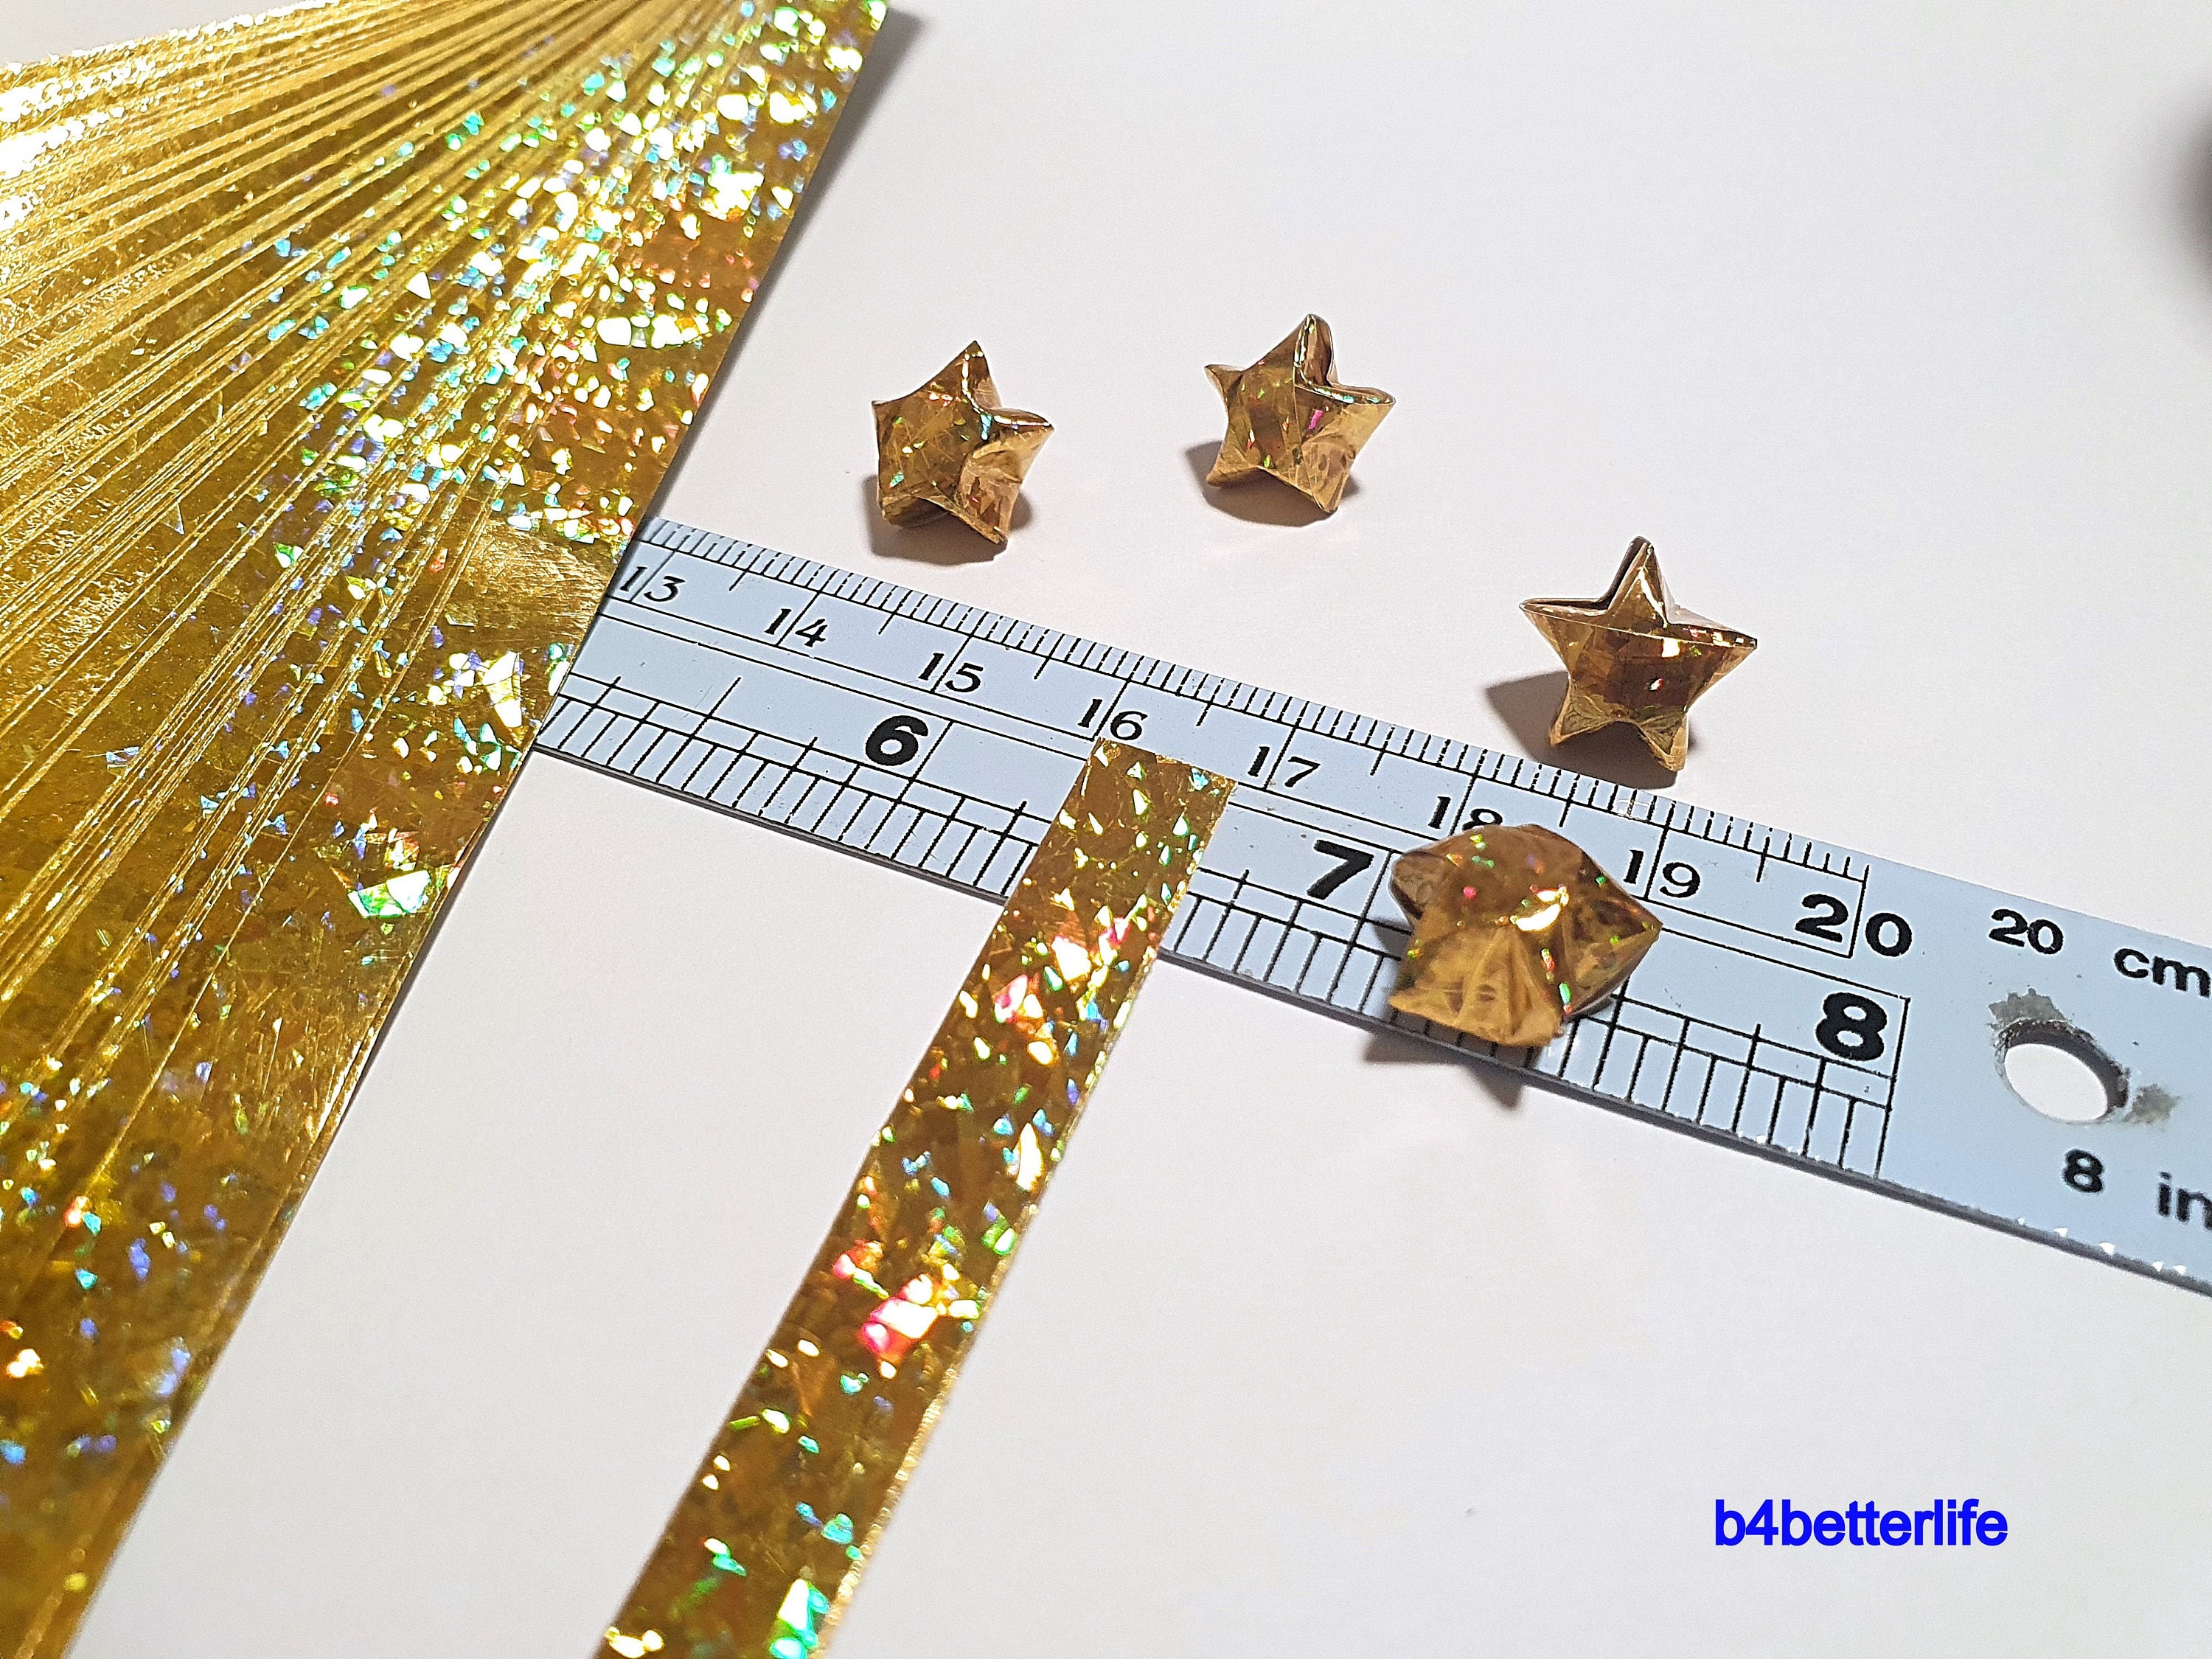 224 Strips DIY Origami Star Paper for Folding Medium Size Lucky